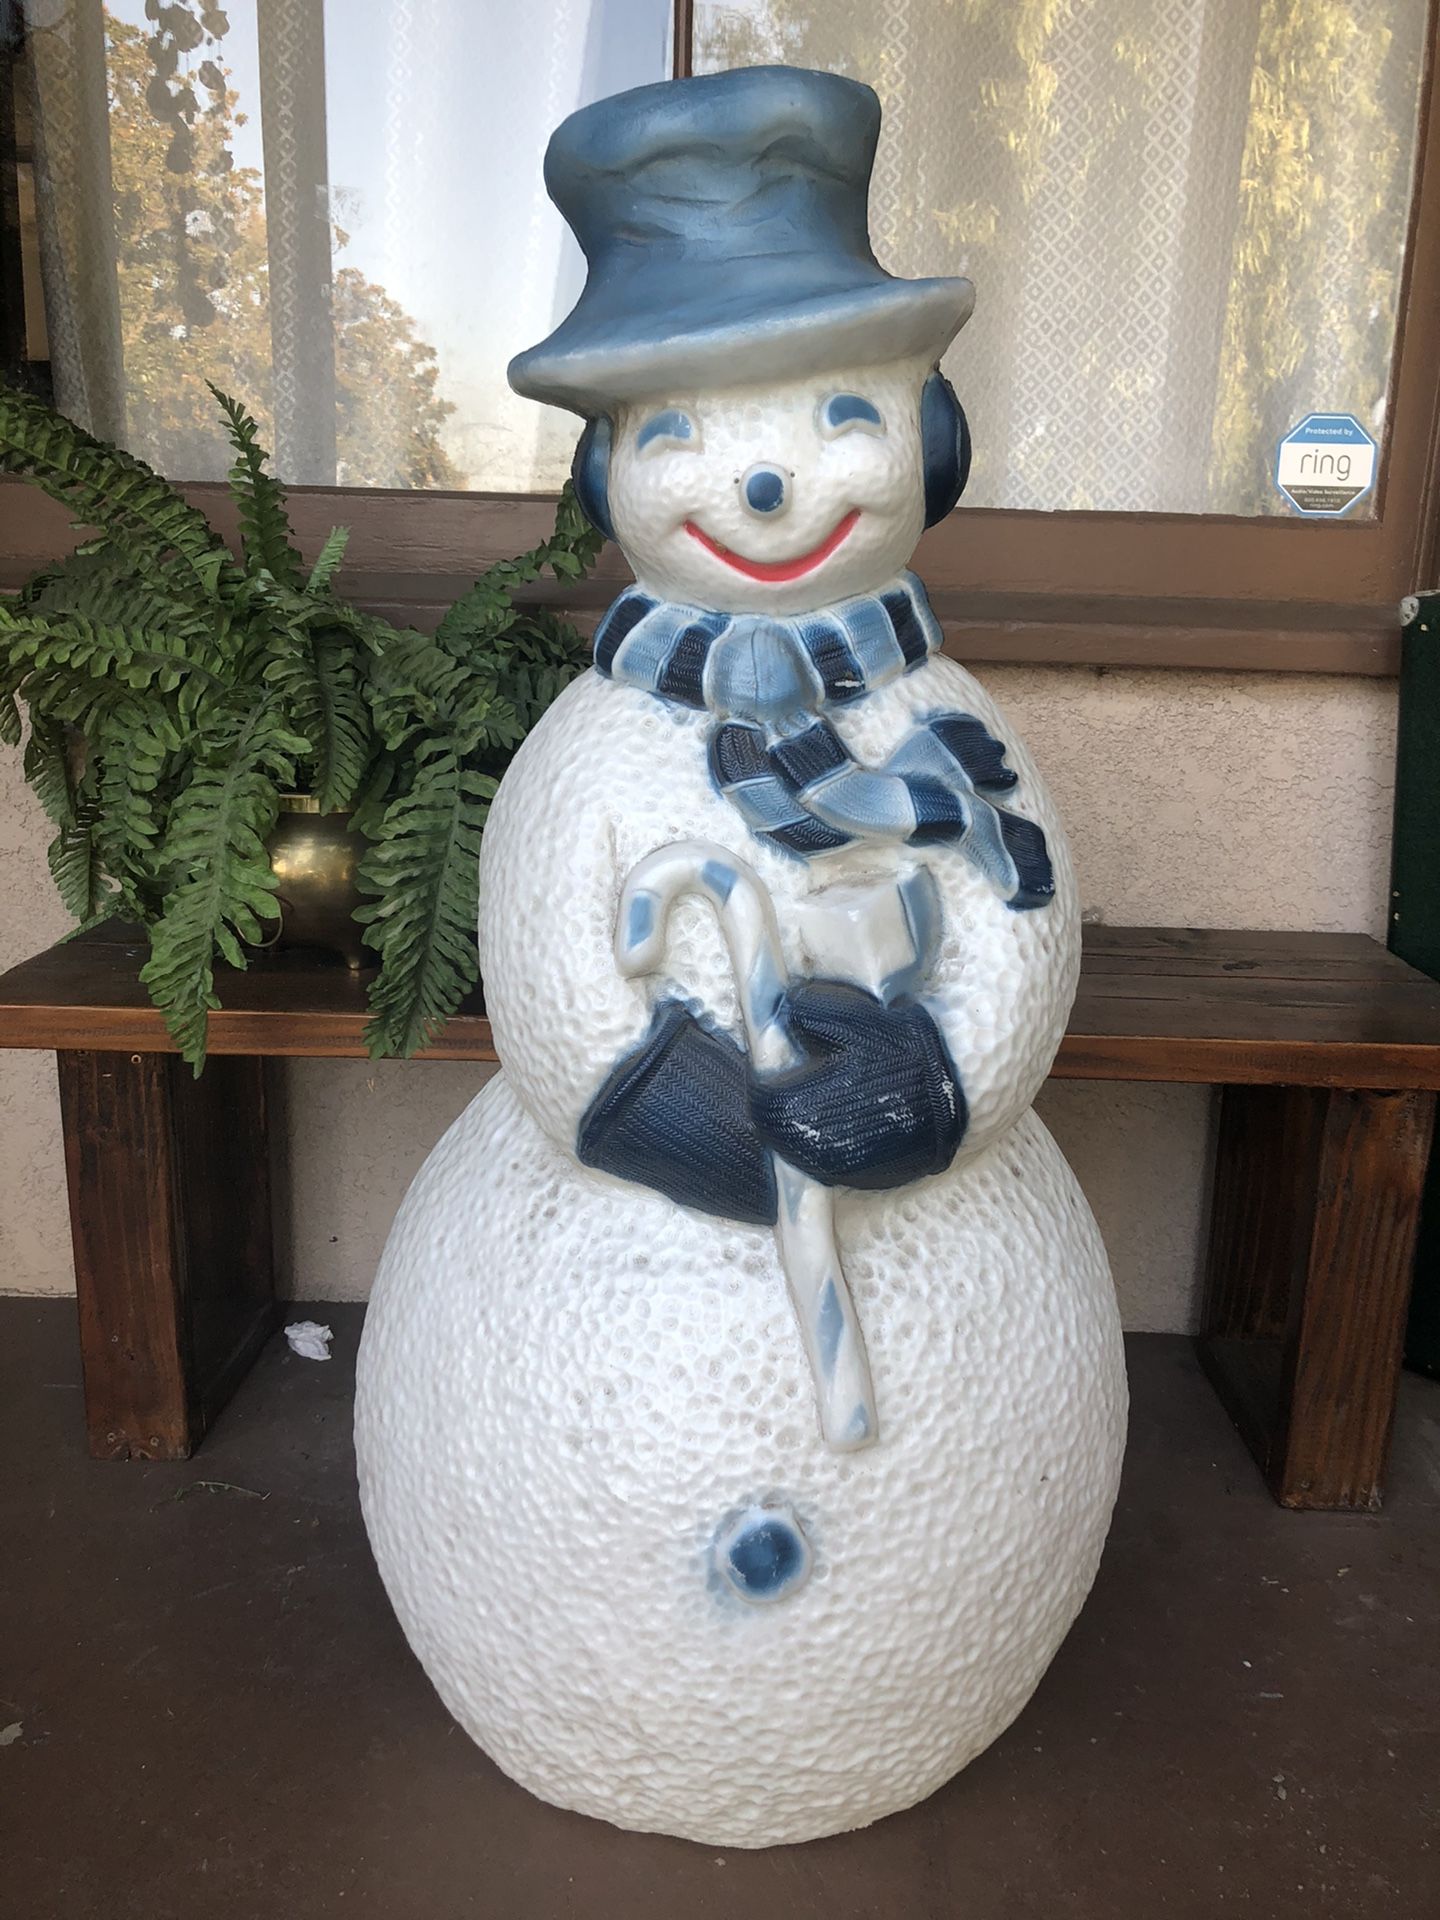 Vintage 3 1/2 foot Tall Plastic Mold Lighted Snowman Christmas Outdoor Yard Decor Working!